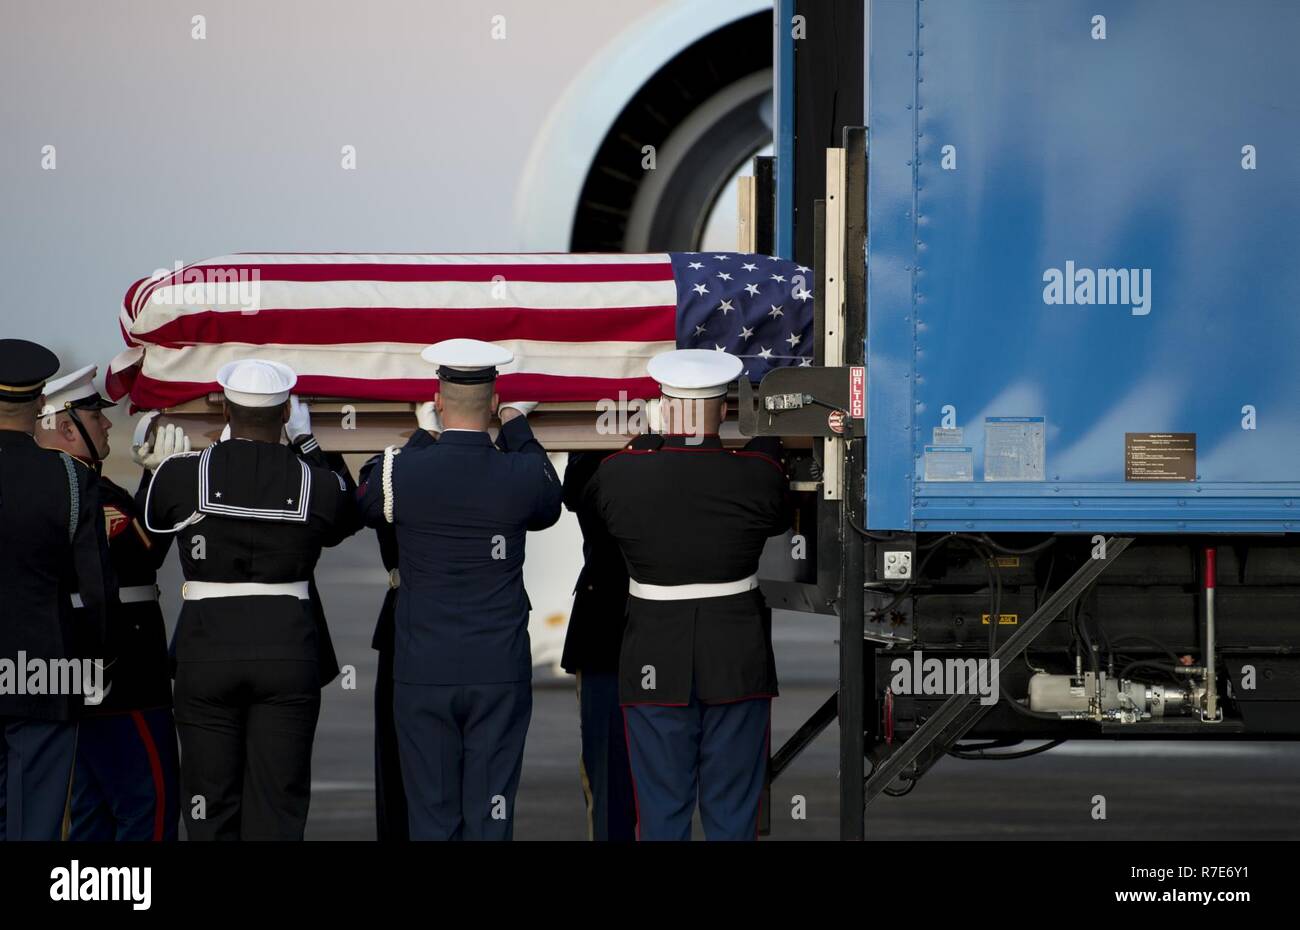 U.S. service members with the Joint Forces Honor Guard carry the casket of former U.S. President George H.W. Bush during an arrival ceremony at Ellington Field Joint Reserve Base in Houston, Texas, Dec. 5, 2018. Nearly 4,000 military and civilian personnel from across all branches of the U.S. armed forces, including Reserve and National Guard components, provided ceremonial support during the state funeral of George H.W. Bush, the 41st President of the United States. Stock Photo